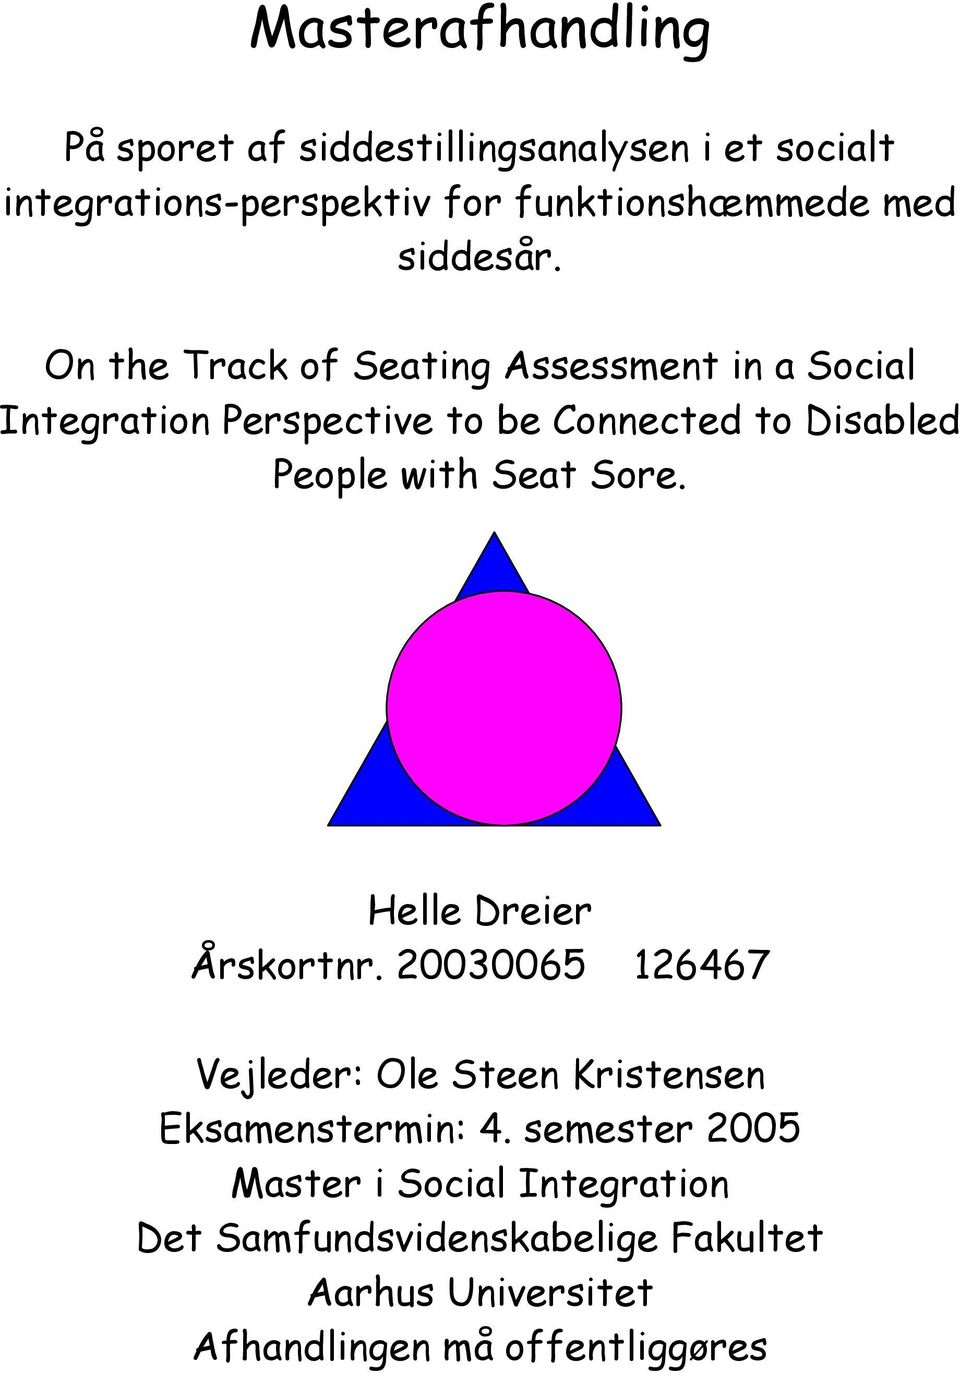 On the Track of Seating Assessment in a Social Integration Perspective to be Connected to Disabled People with Seat